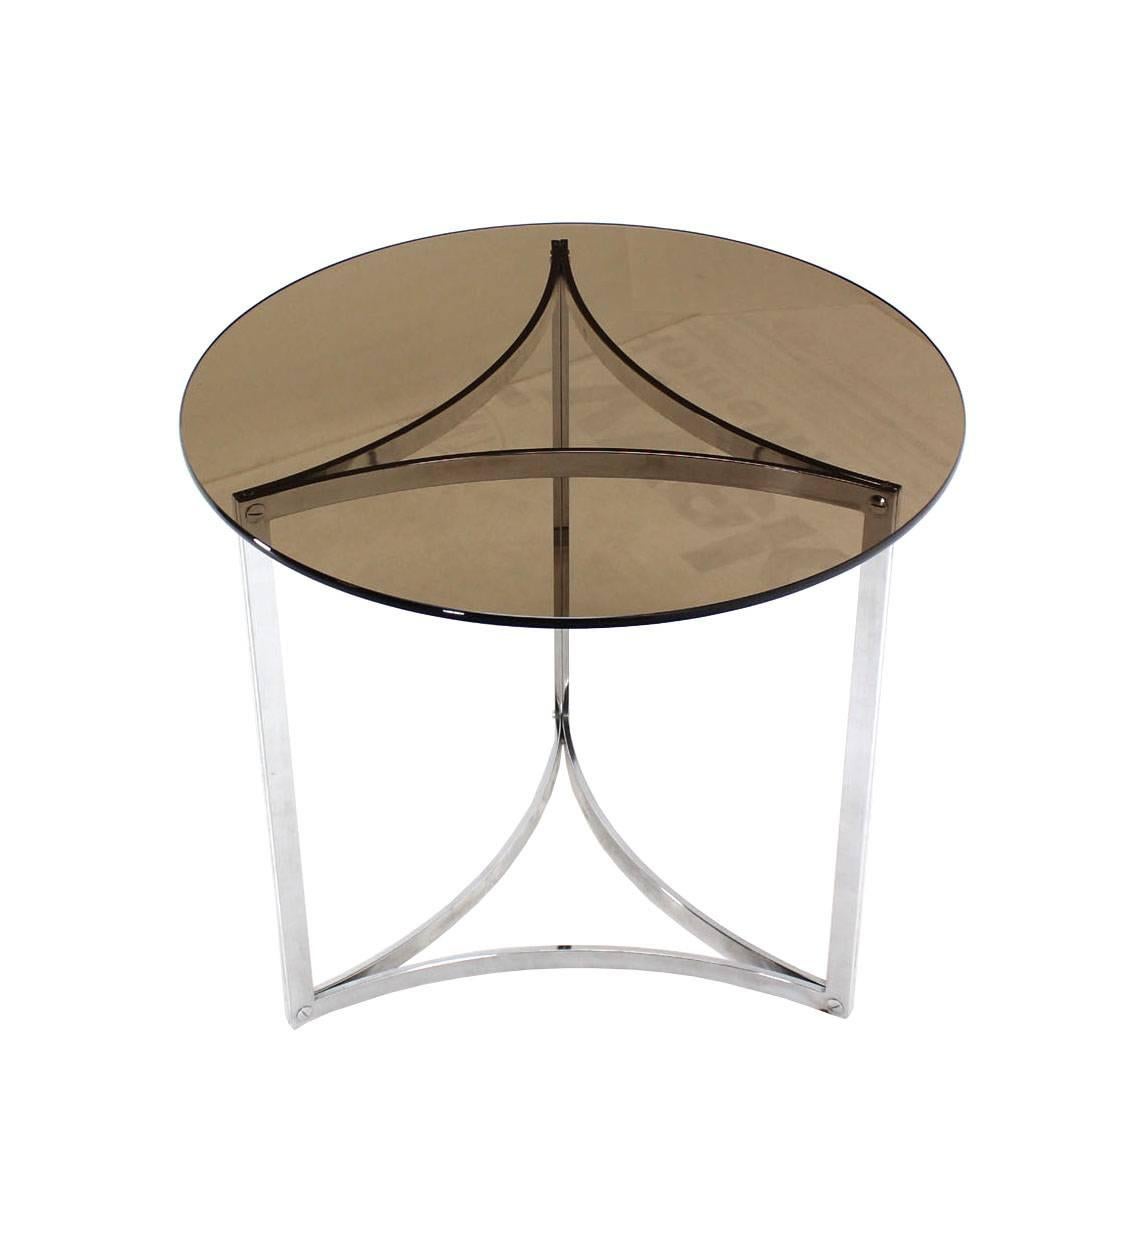 Triangular Bent Chrome Ribbon Base Smoked Glass Top Side End Table In Excellent Condition For Sale In Rockaway, NJ